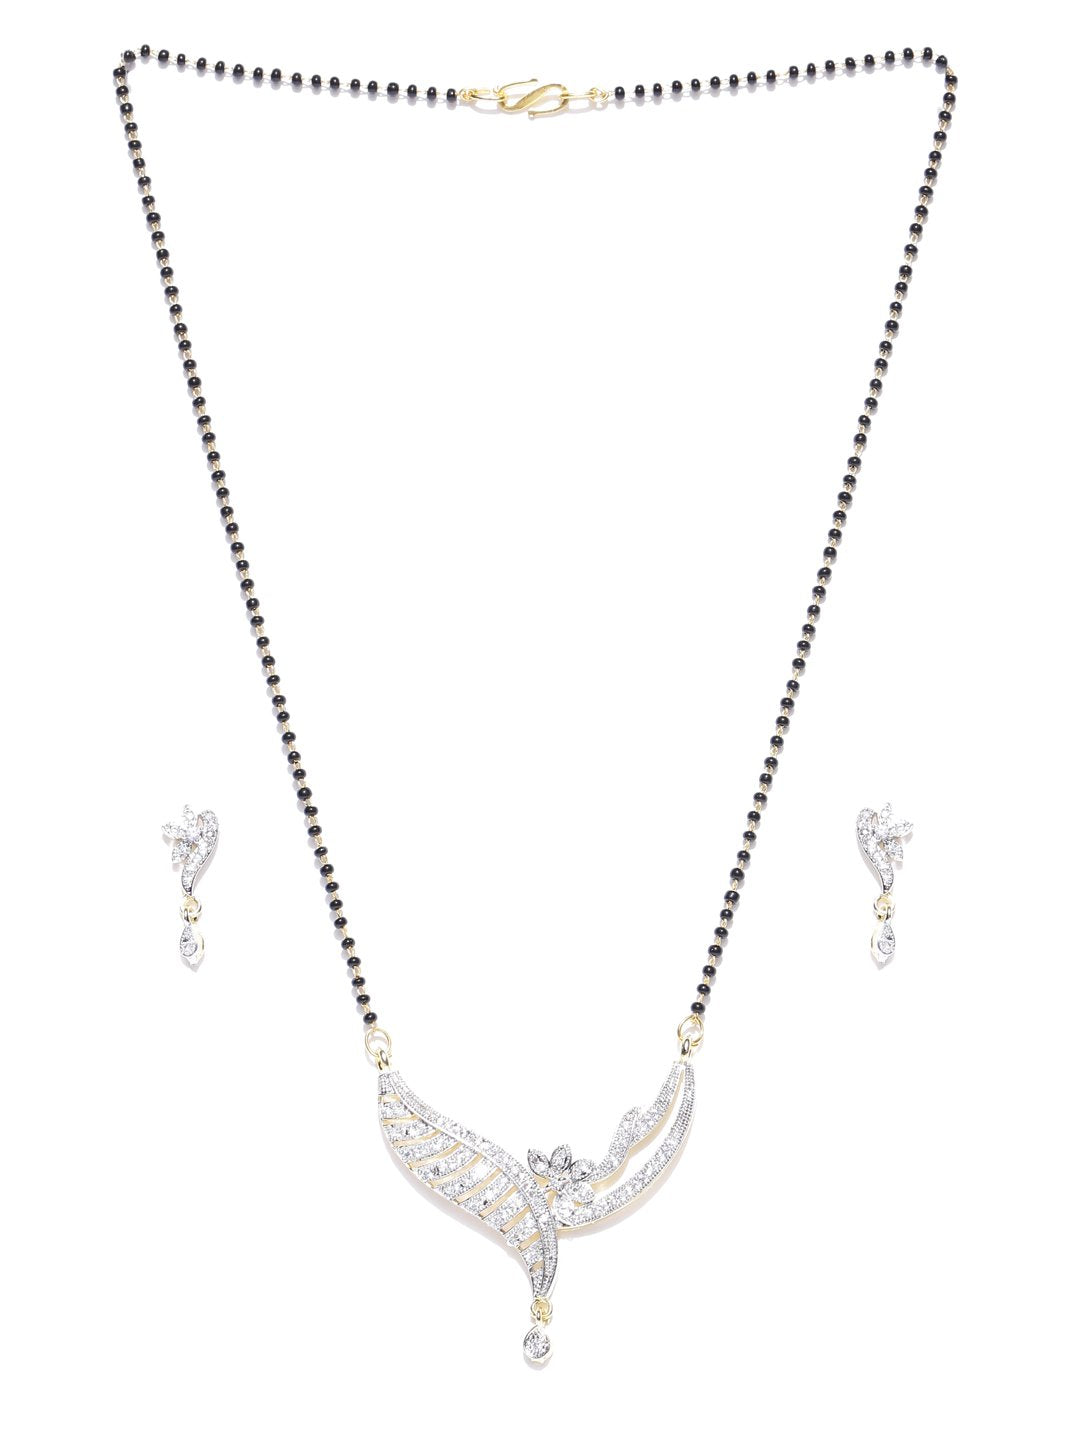 American Diamond Floral Designer Traditional Mangalsutra With Earrings Set For Women